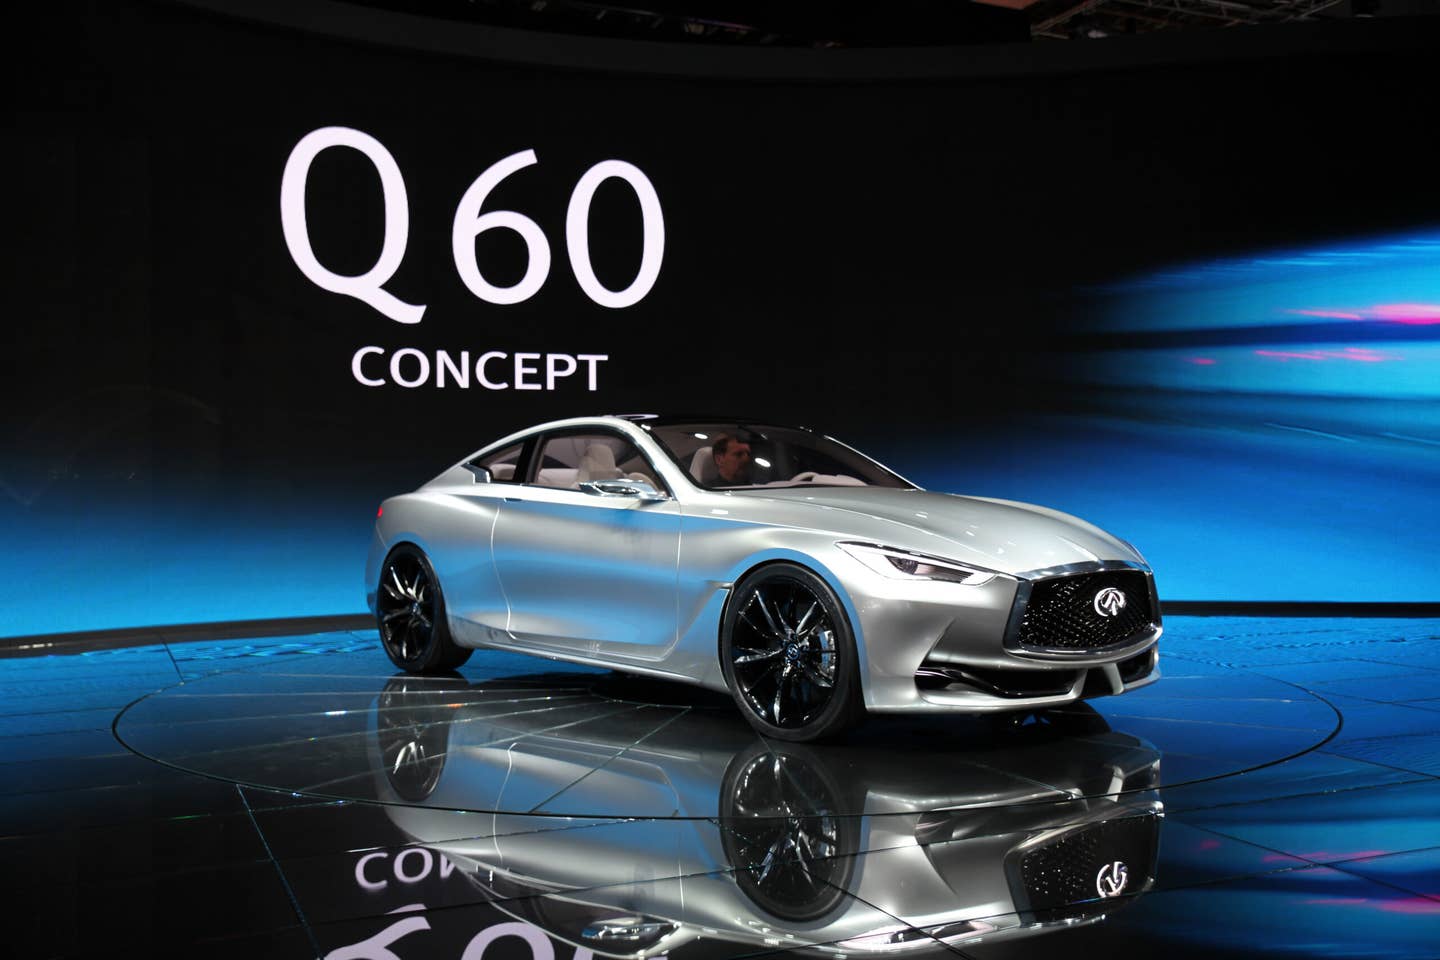 Detroit/Hong Kong - At 8:05am on Tuesday in Detroit at the 26th annual North American International Auto Show, Infiniti officially unveiled its Q60 Concept sports coupe for the global media. Introducing the important 2+2 design was new President of Infiniti Motor Company Ltd., Roland Krüger. Following the drive-on reveal of the Q60 Concept in Cobo Hall, it was confirmed that the sleek design foreshadows the production version of a third-generation coupe due out during calendar-year 2016.